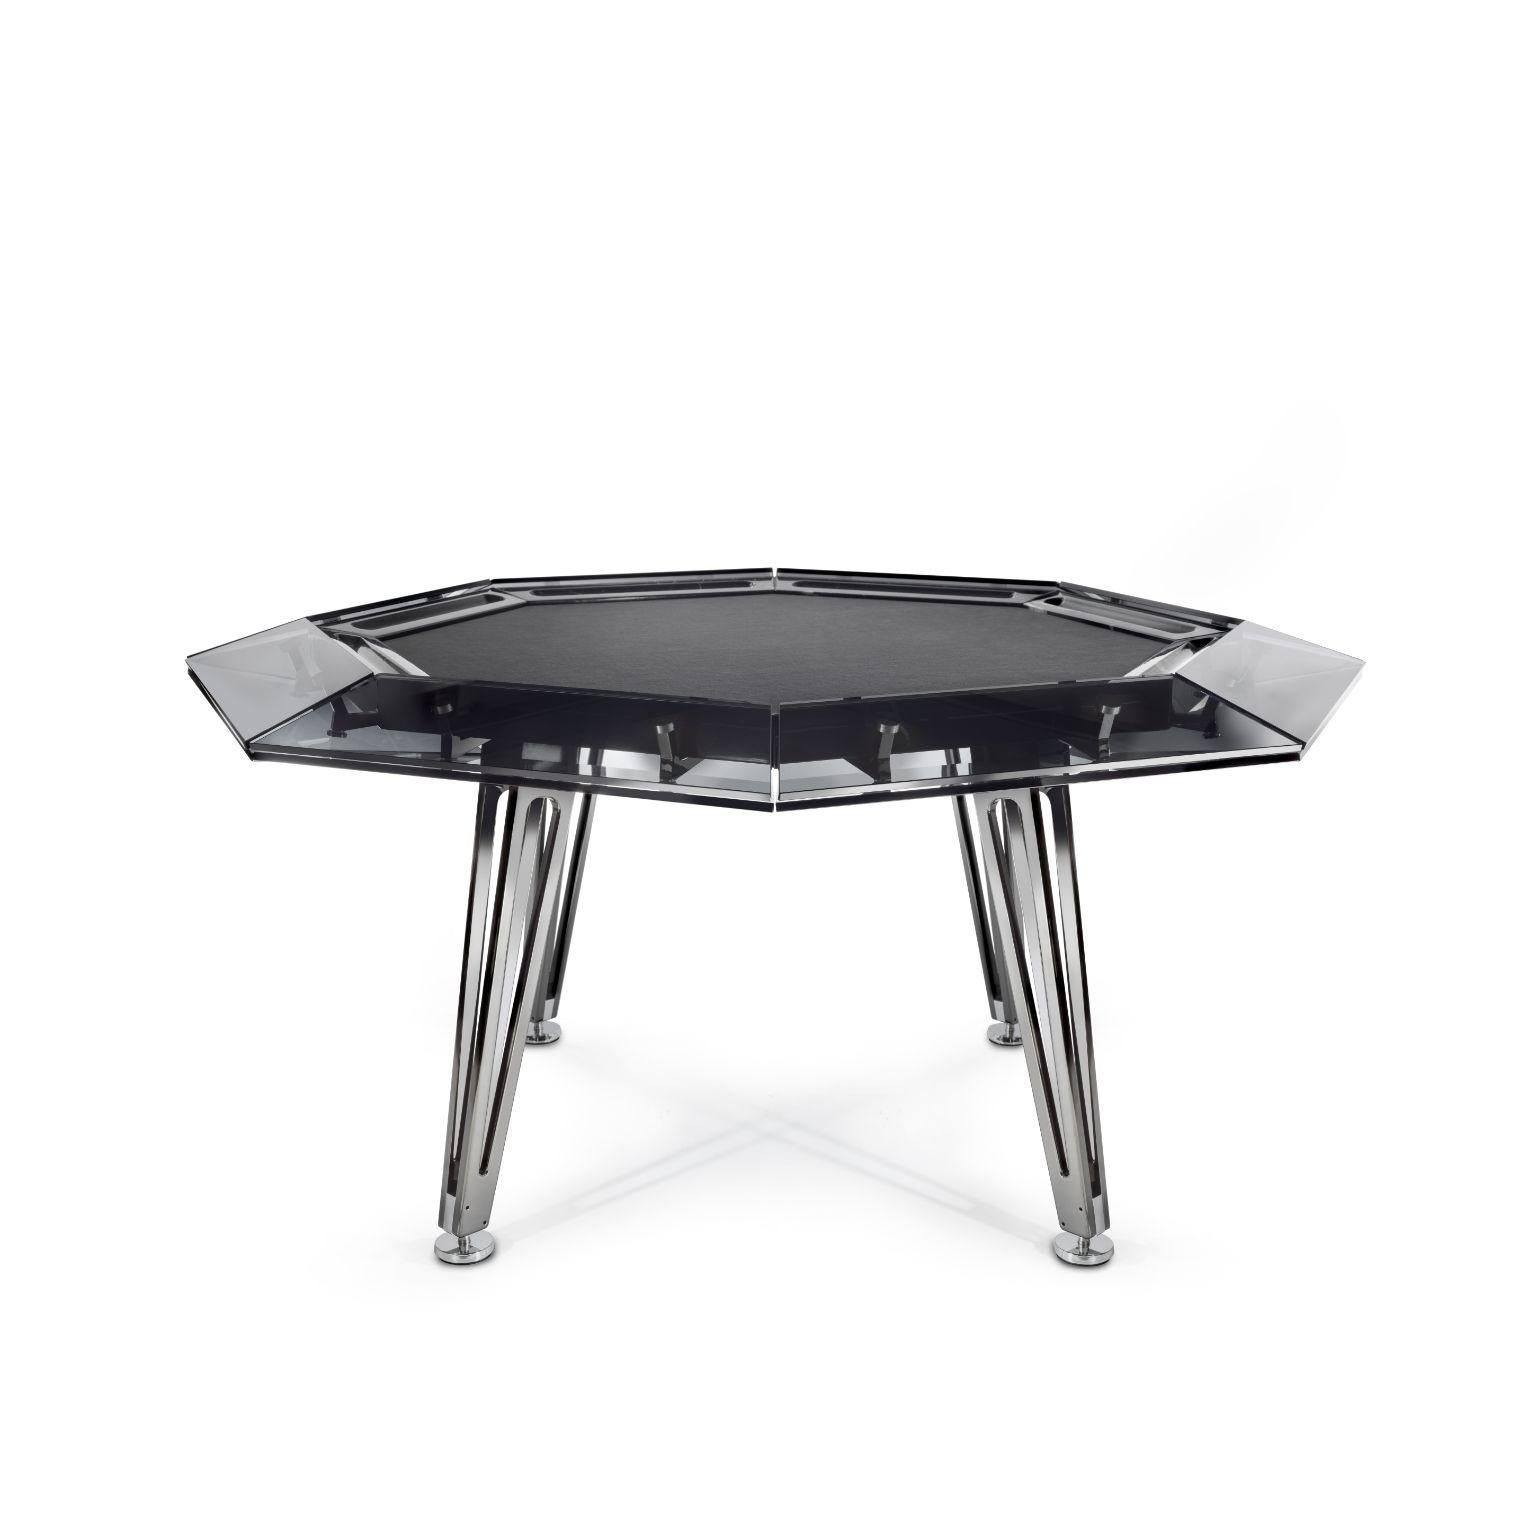 Italian Unootto Black Marble 8 Players Poker Table by Impatia